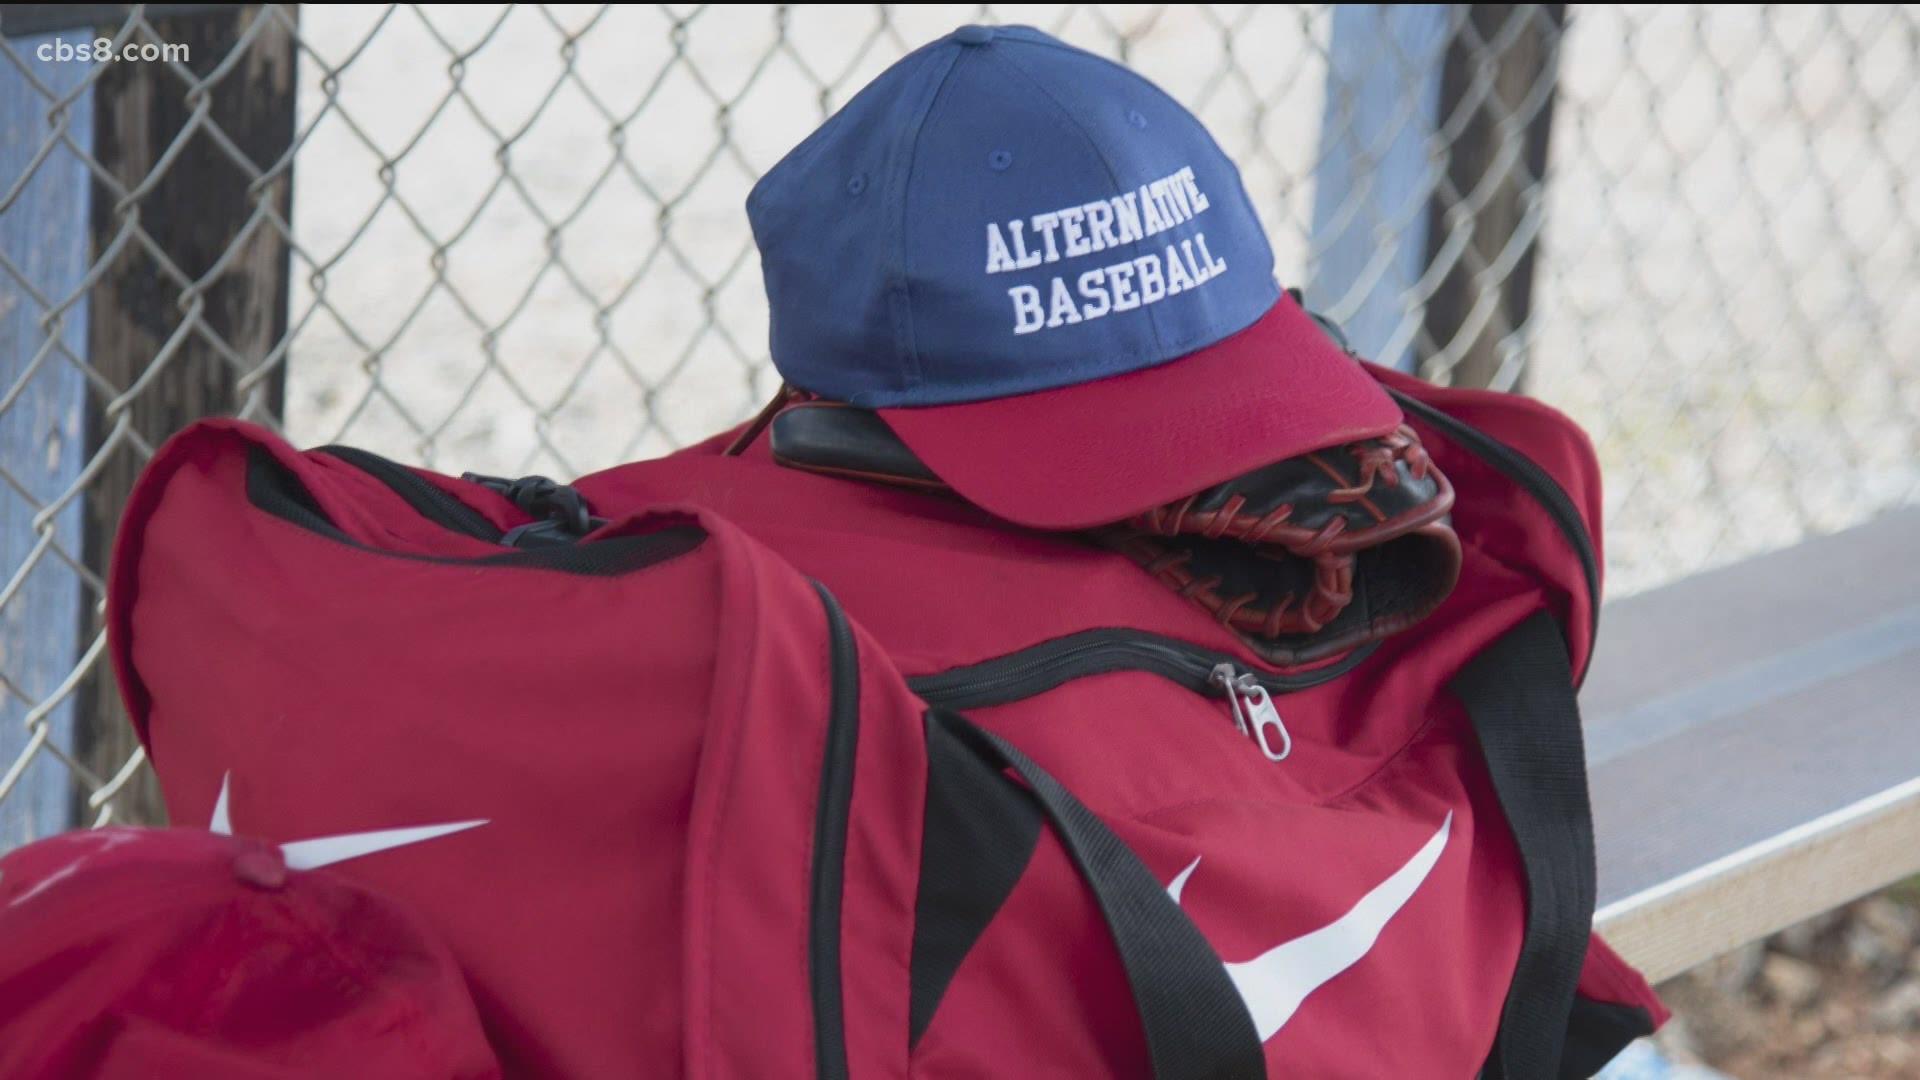 Alternative Baseball "provides an authentic baseball experience for teens and adults with autism & other disabilities for physical and social skills enrichment."